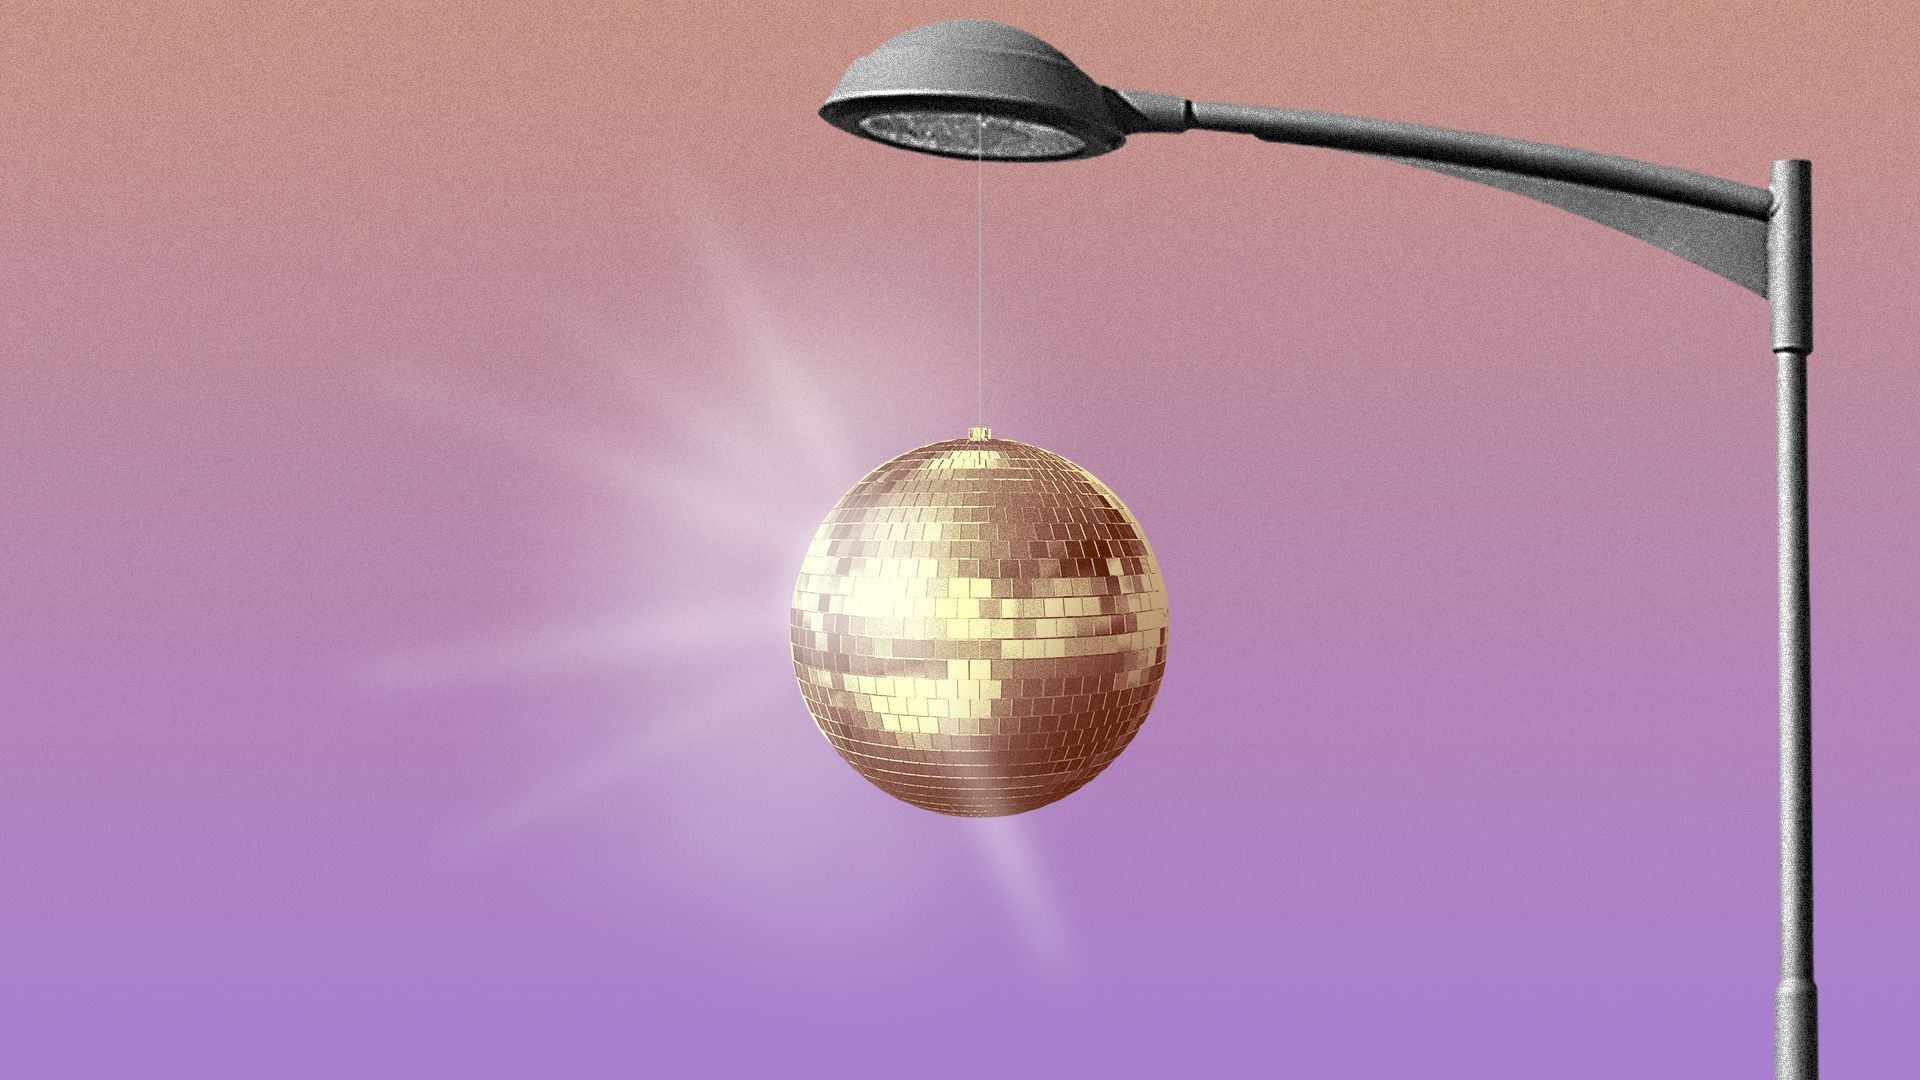 Illustration of a disco ball on a street lamp.